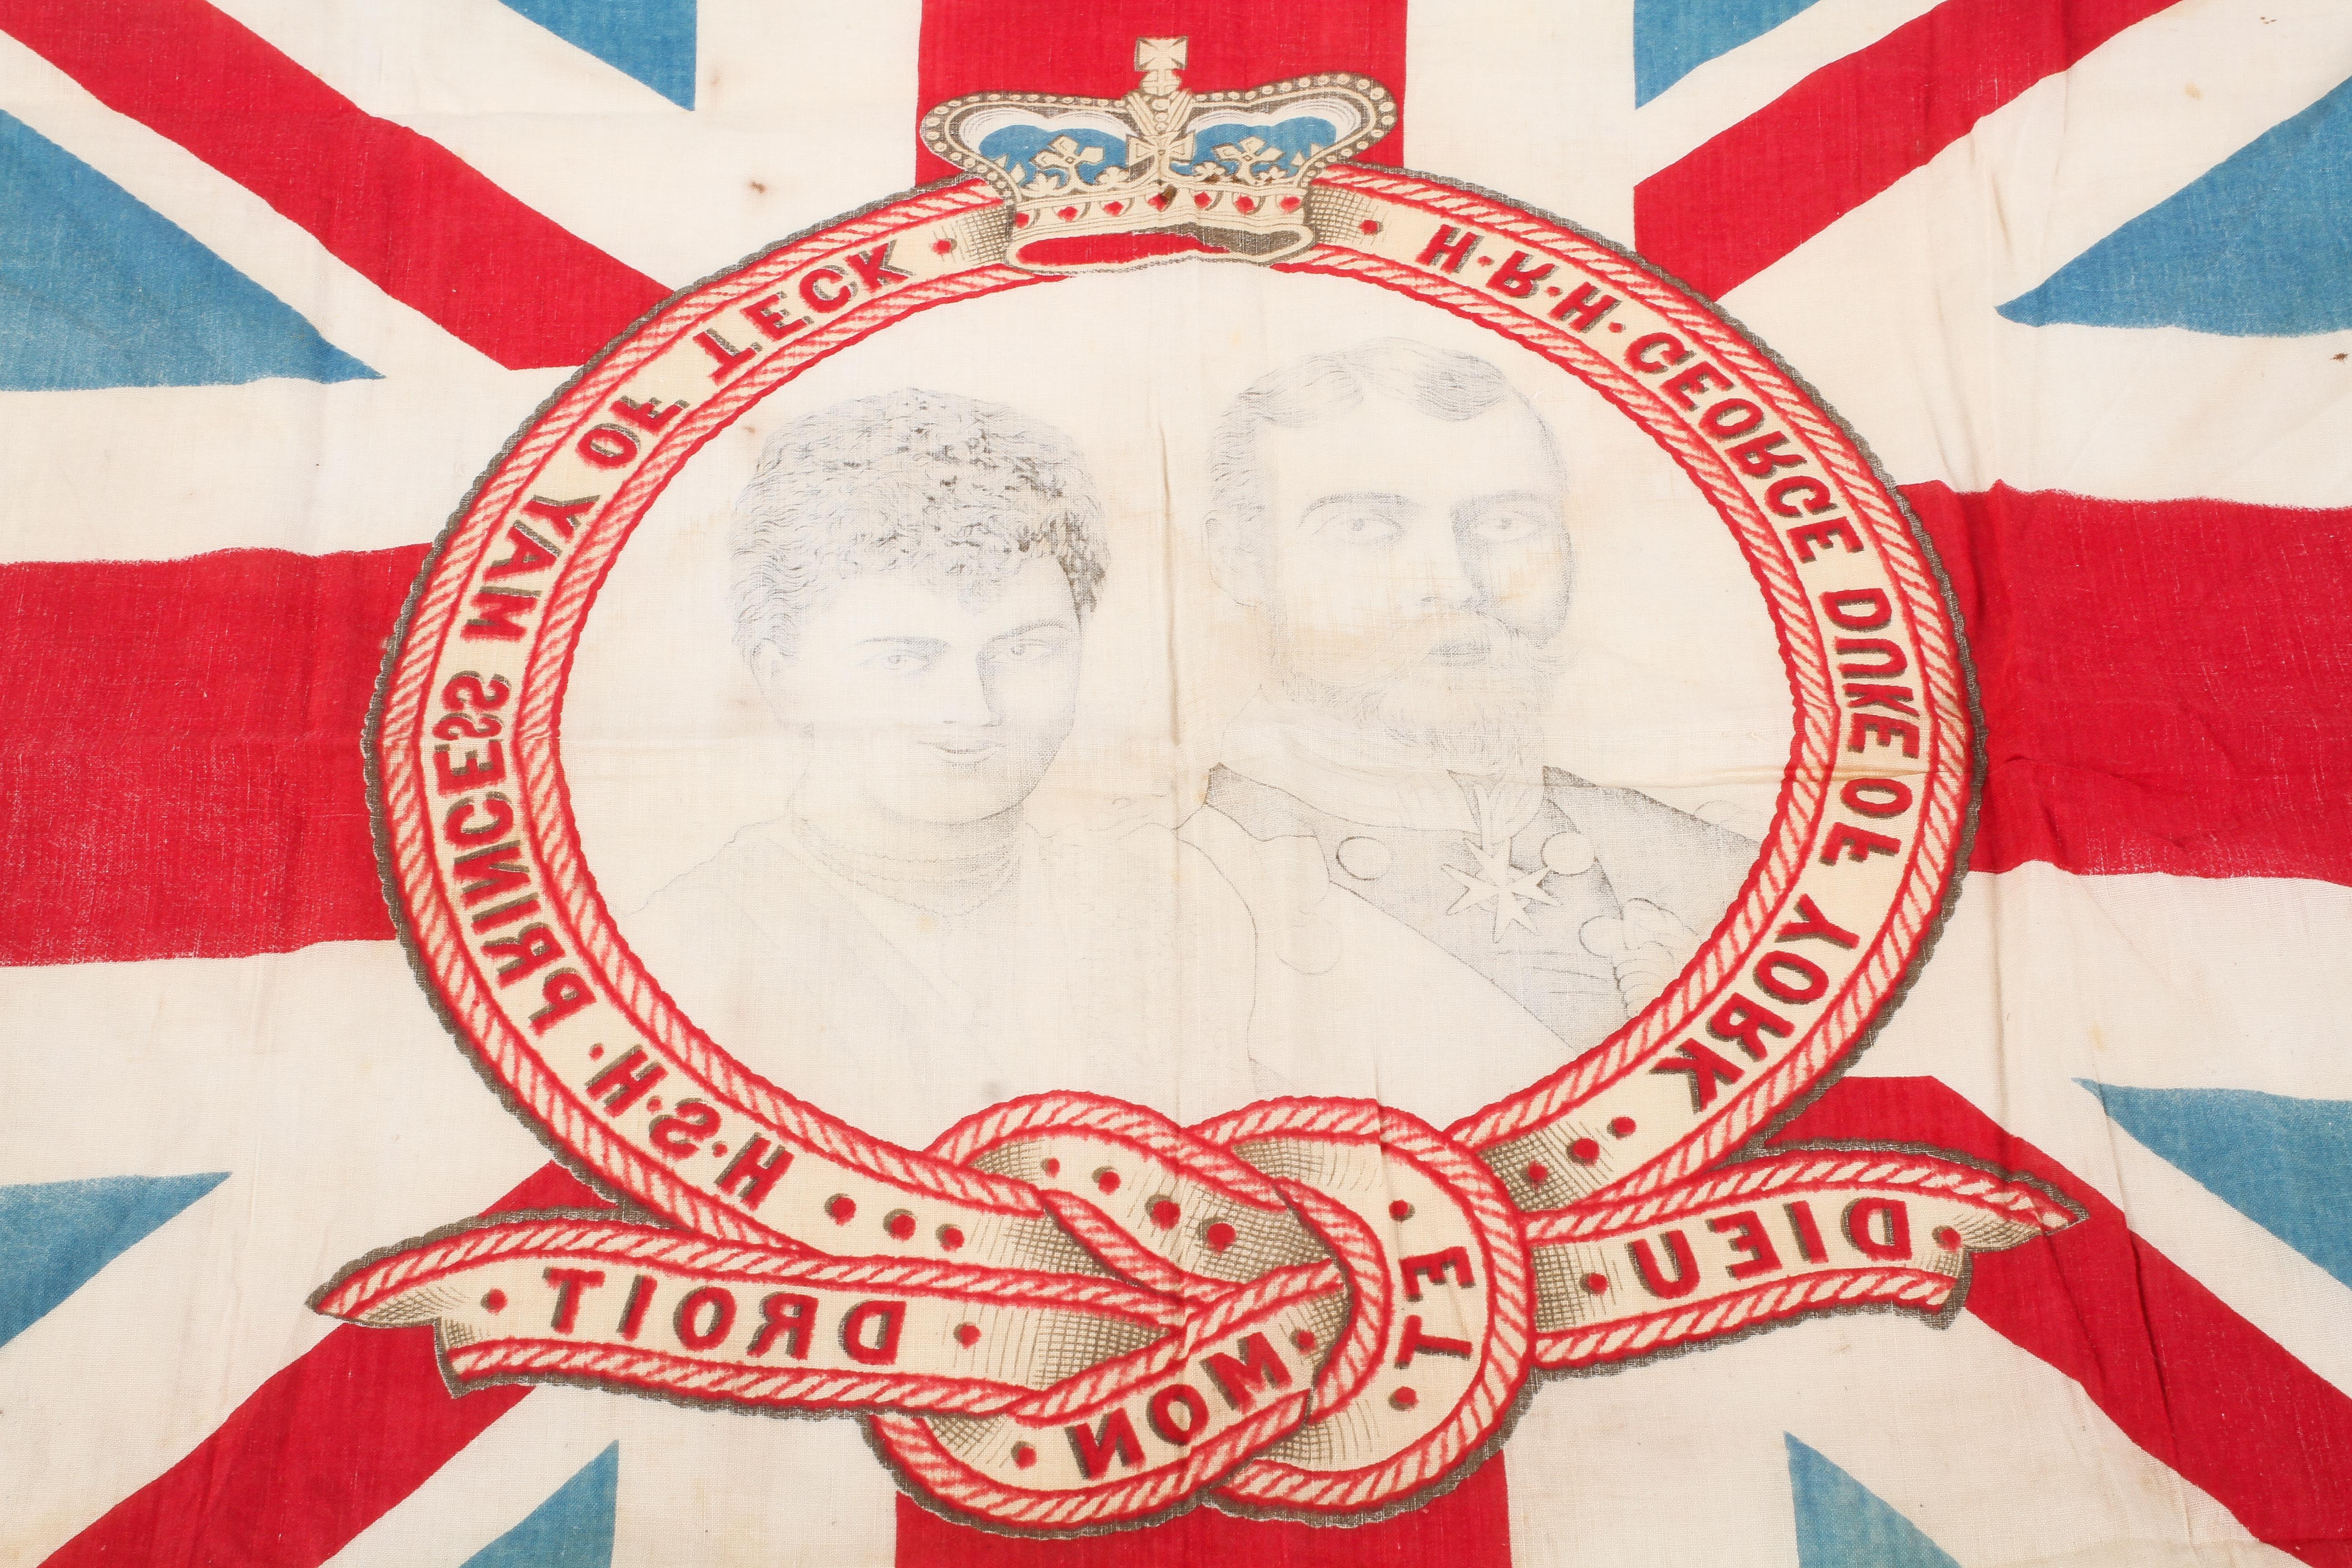 An antique commemorative flag. The central cartouche printed with the words 'H.R.H. - Image 2 of 2